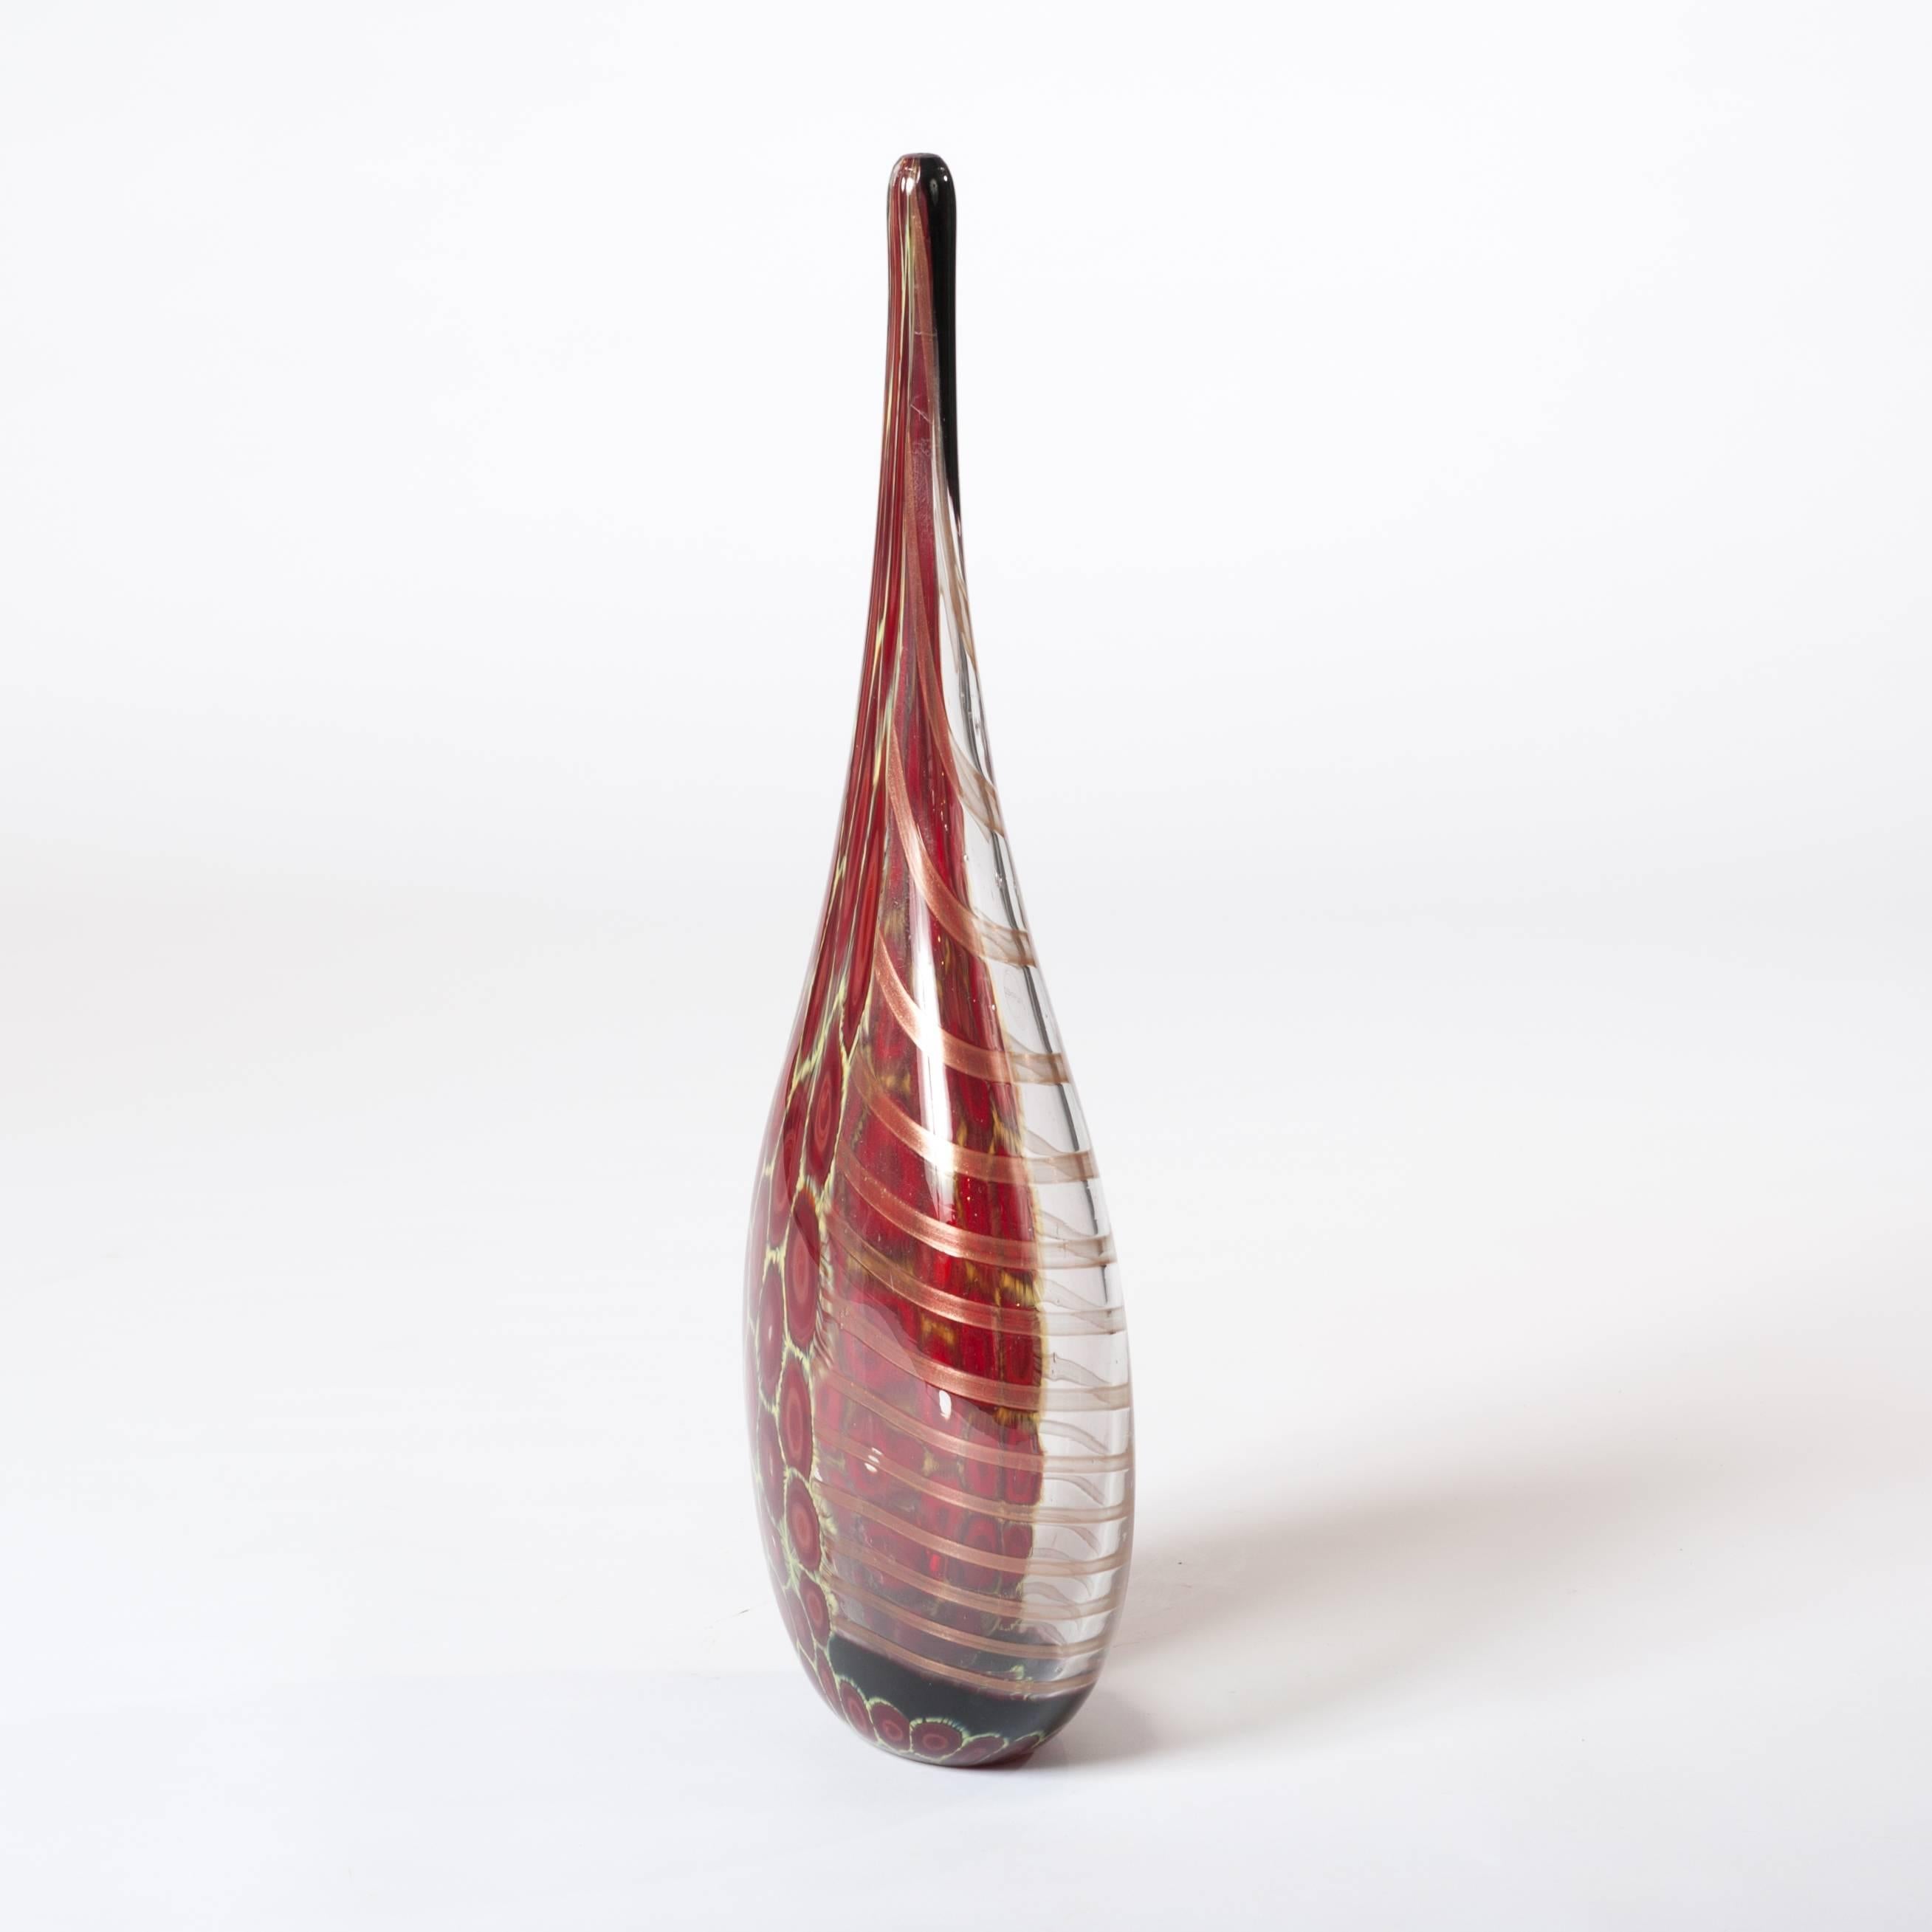 Elegant and tall bottle-shaped Murano glass vase clear glass, dark-red and yellow murrhines on one side and on the other side metallic-cognac colored stripes.
Handsigned: I Muranesi - Limited Edition - 1/1.